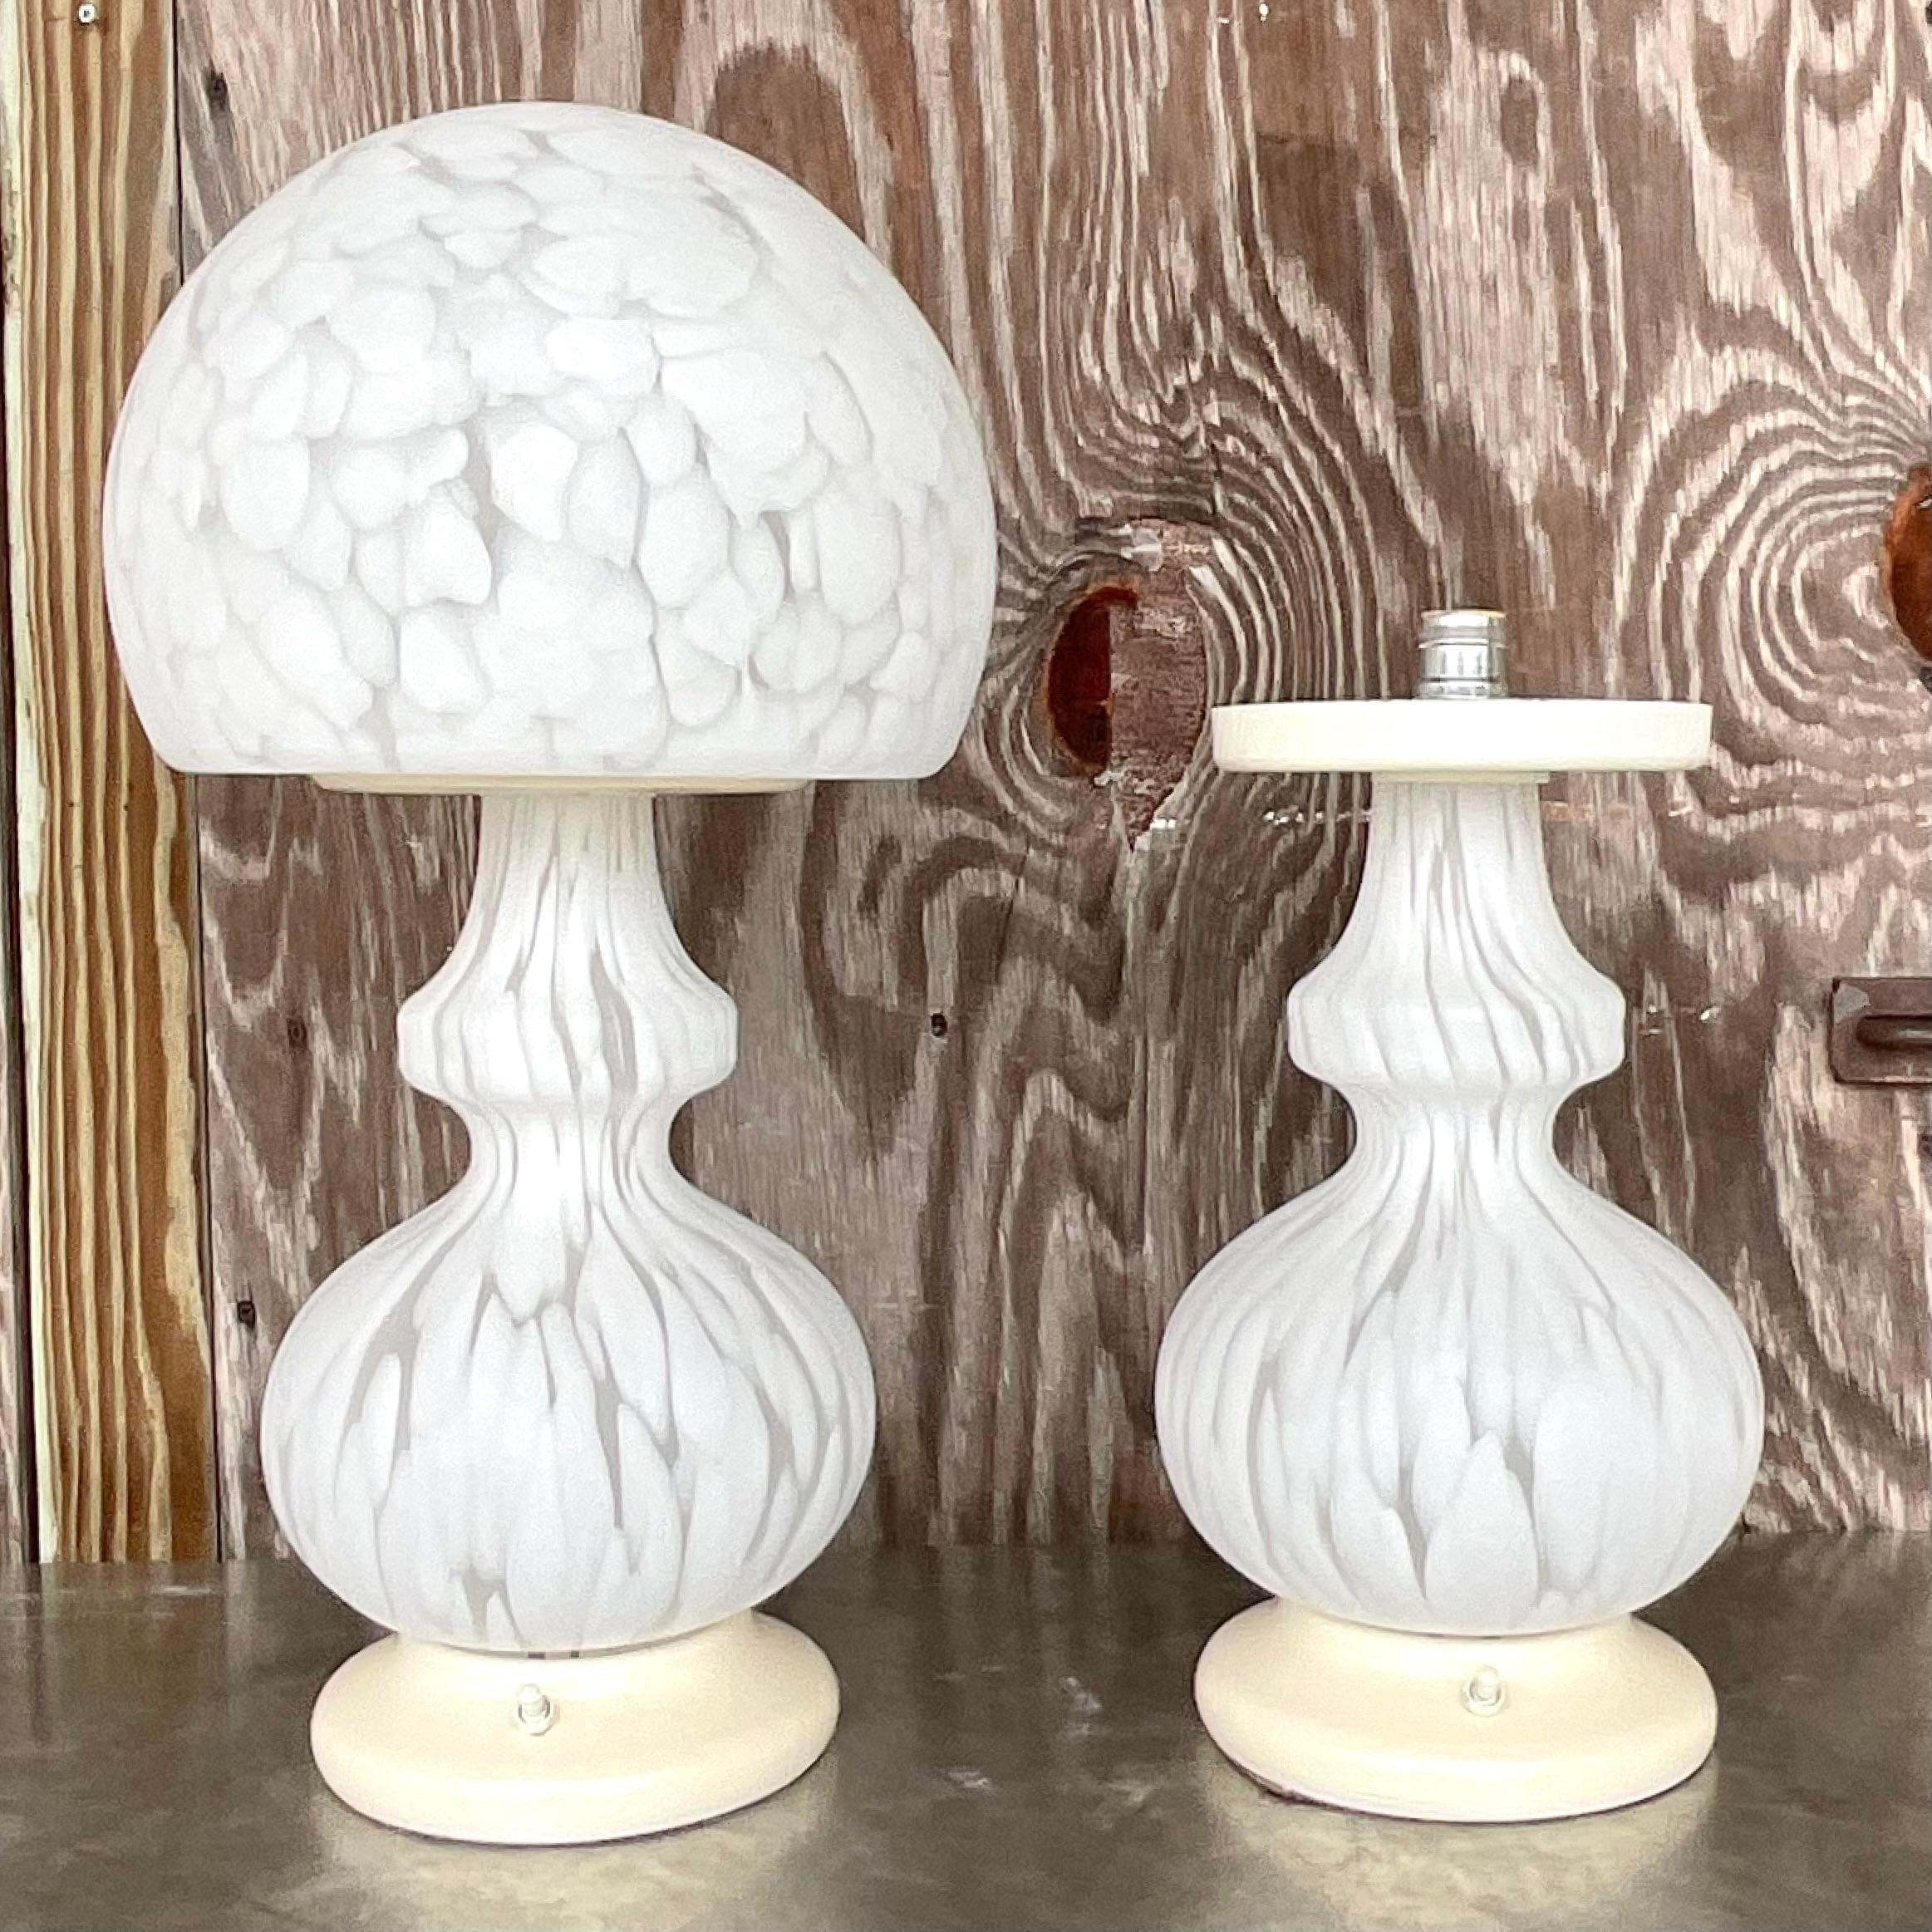 Illuminate your space with sophistication using our Vintage Murano Glass Sommerso Globe Lamps for Laurel - A Pair. These exquisite lamps showcase the timeless elegance of American design, blending the artistry of Murano glass with the craftsmanship